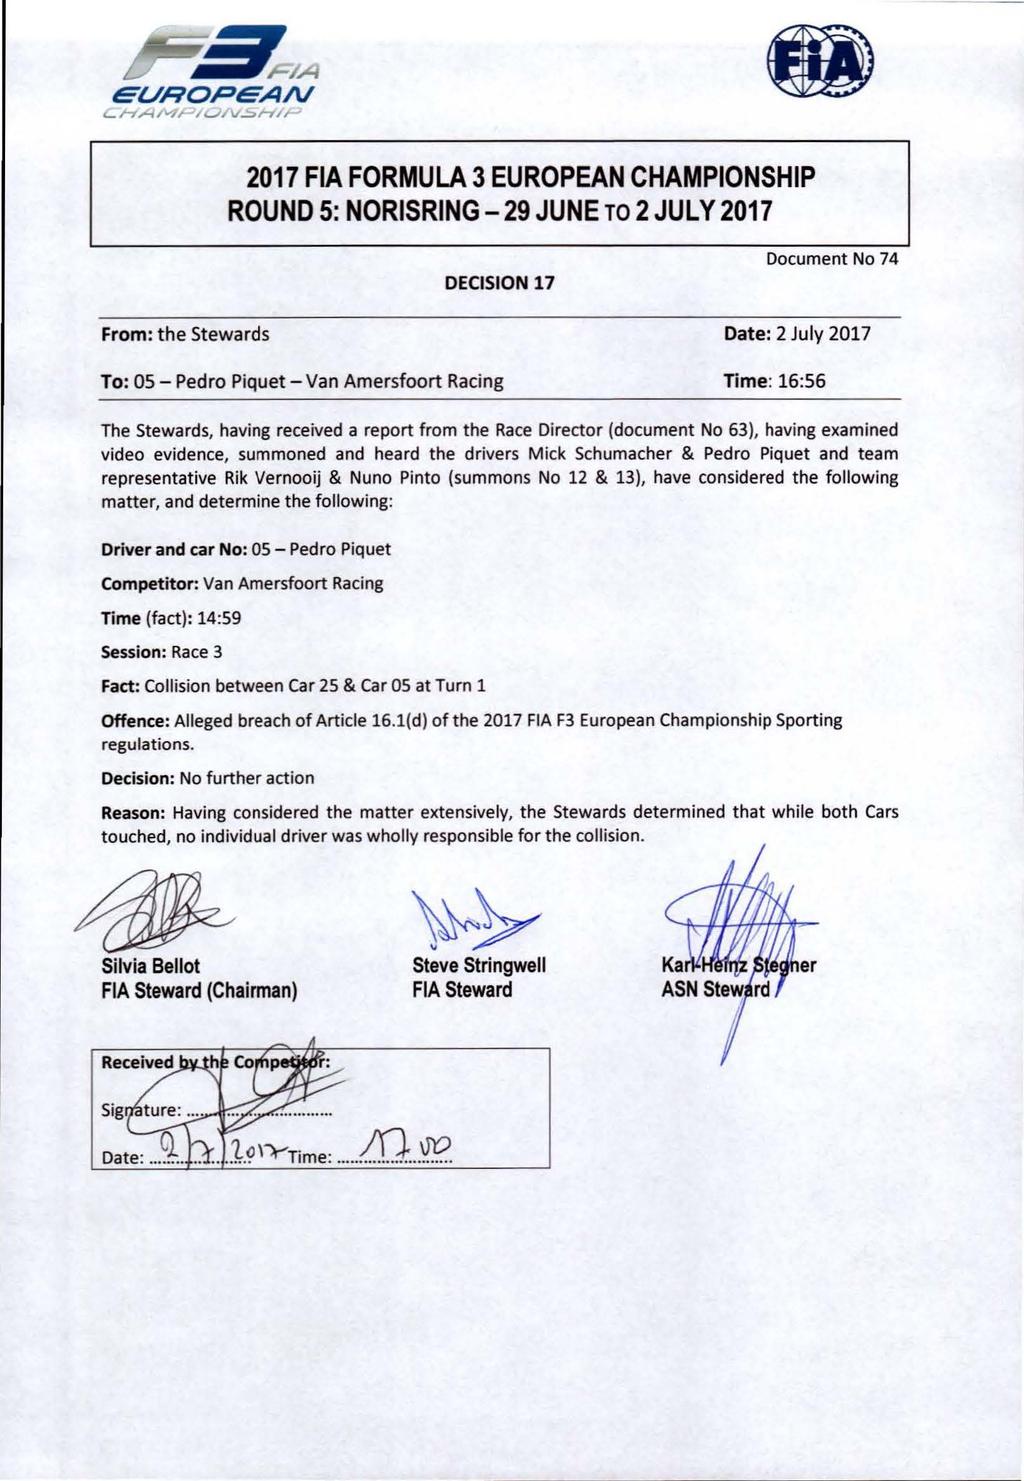 ROUND 5: NORISRING-29 JUNE TO 2 JUL Y 2017 DECISION 17 Document No 74 From: the Stewards Date: 2 July 2017 To: 05 - Pedro Piquet - Van Amersfoort Racing Time: 16:56 The Stewards, having received a